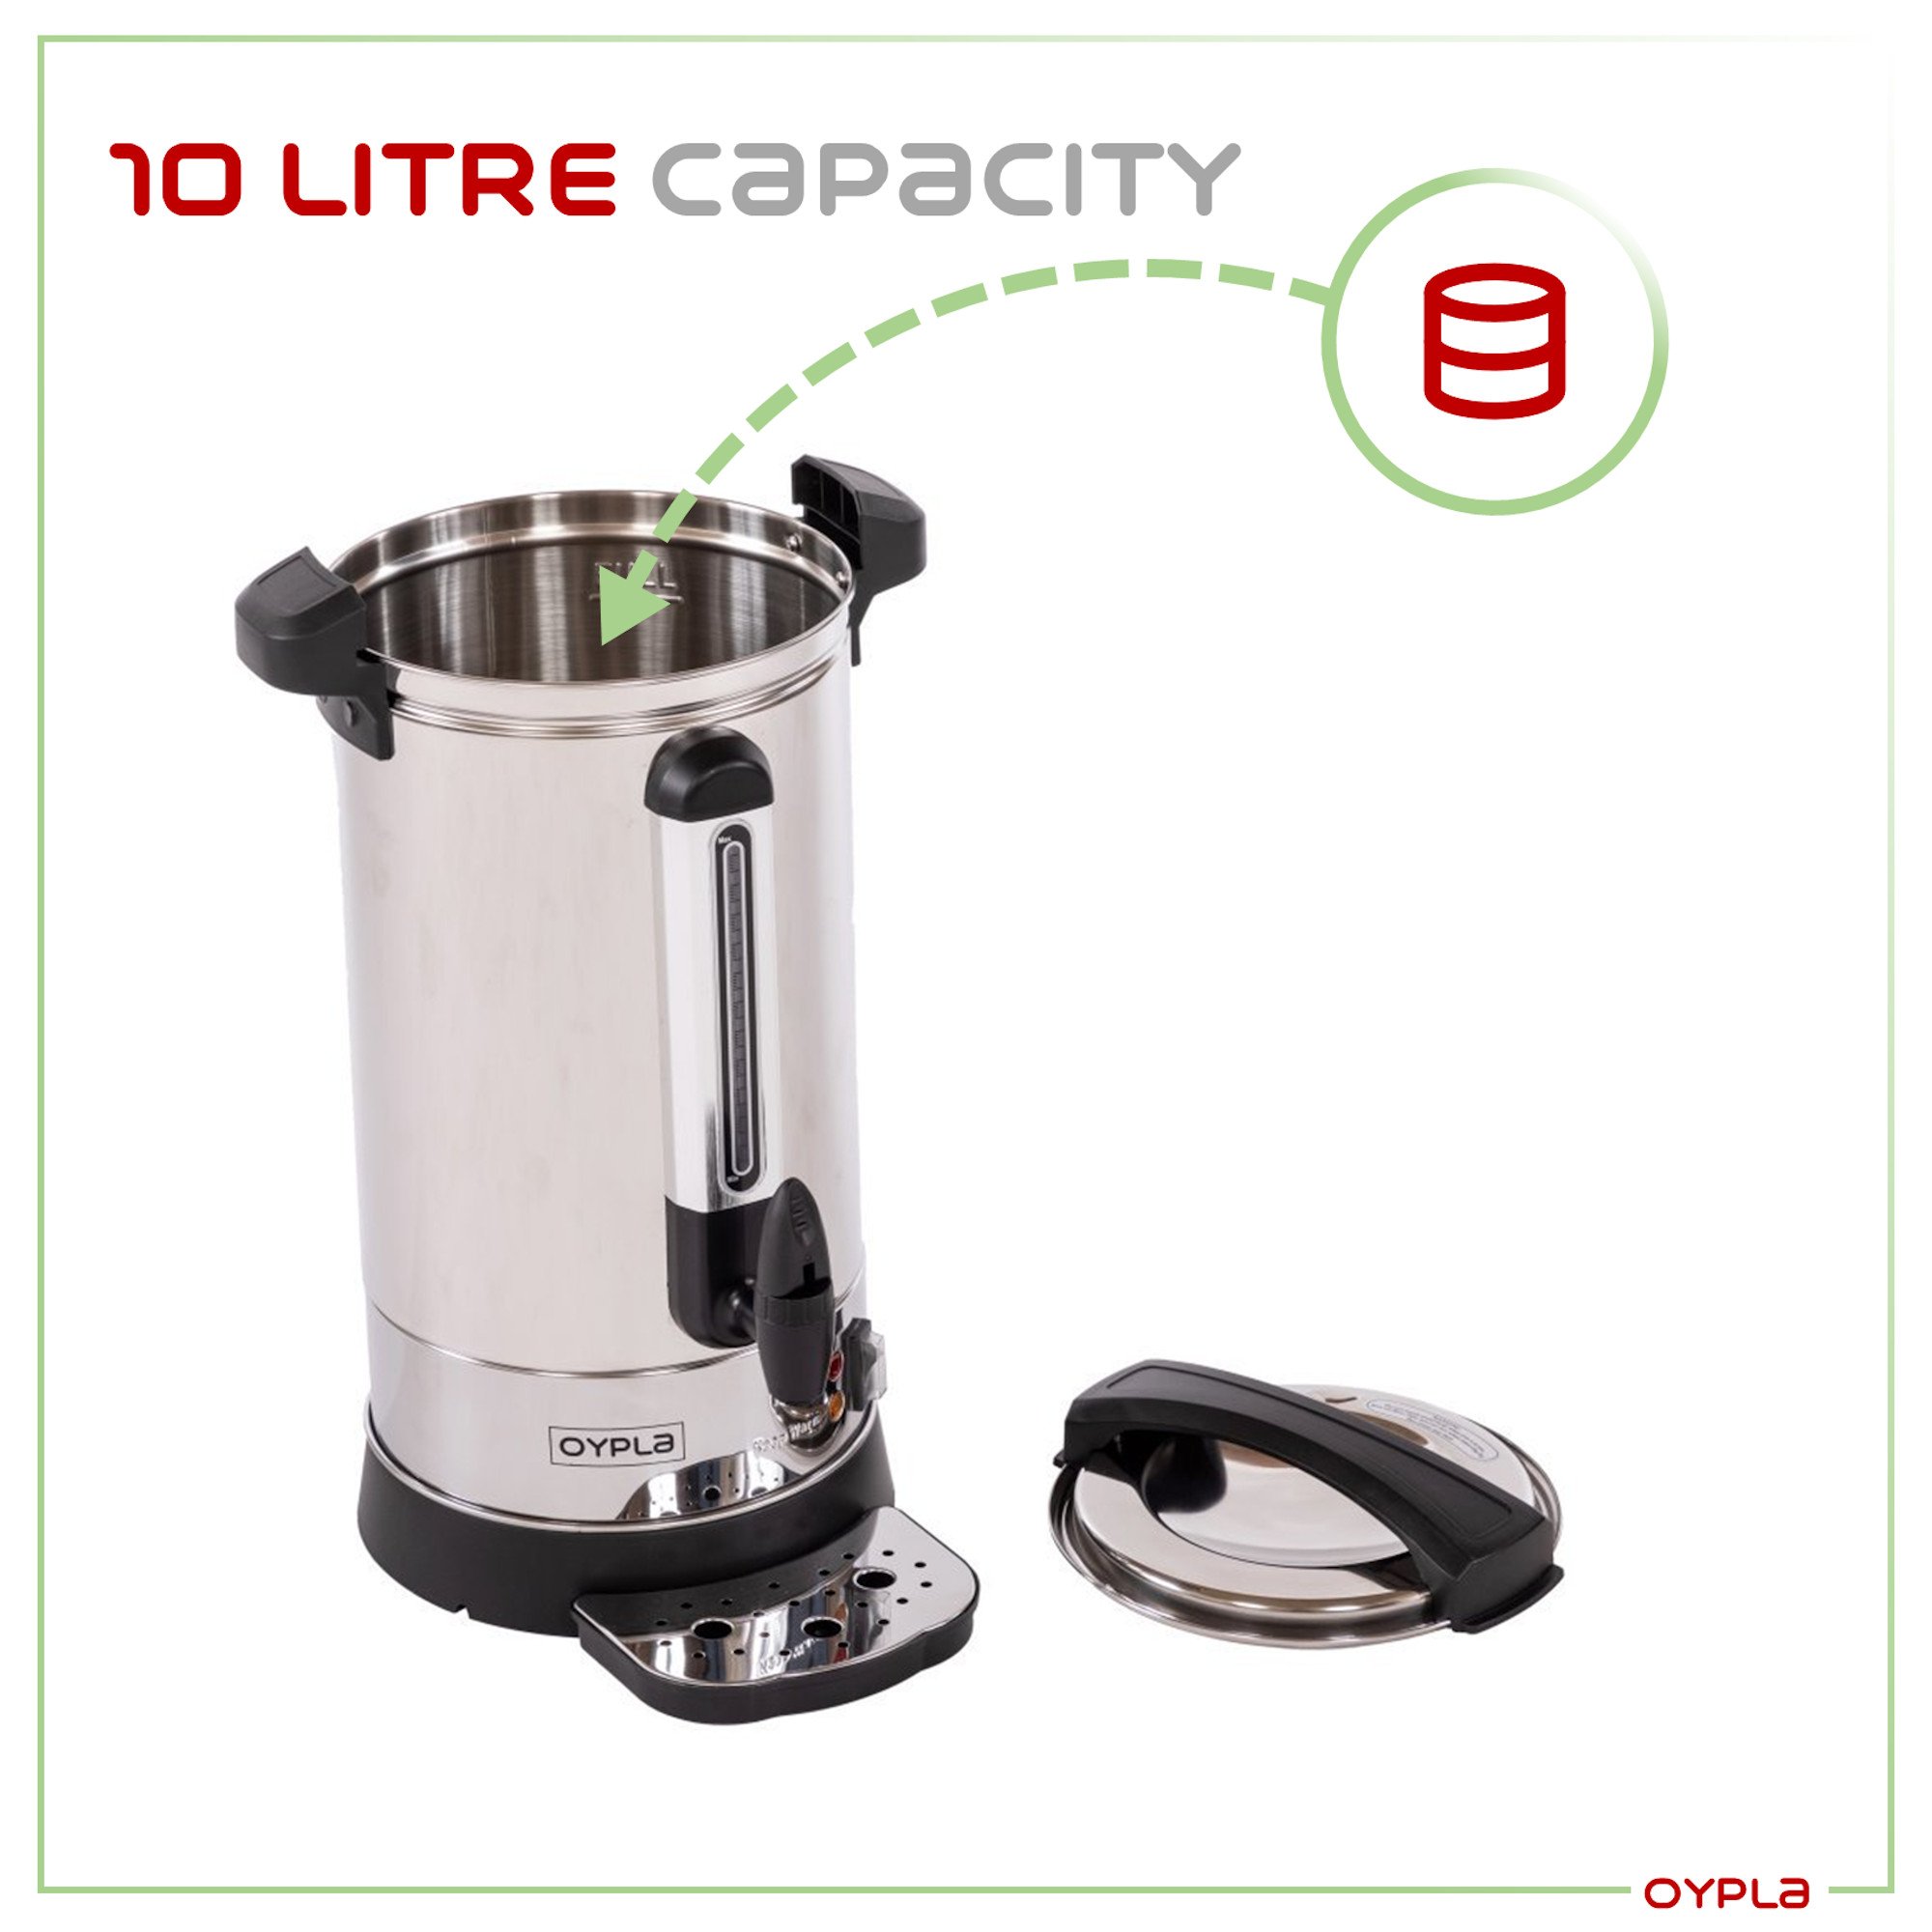 Stainless Steel 10 Litre Catering Kitchen Hot Water Boiler Tea Coffee Urn 1500W 